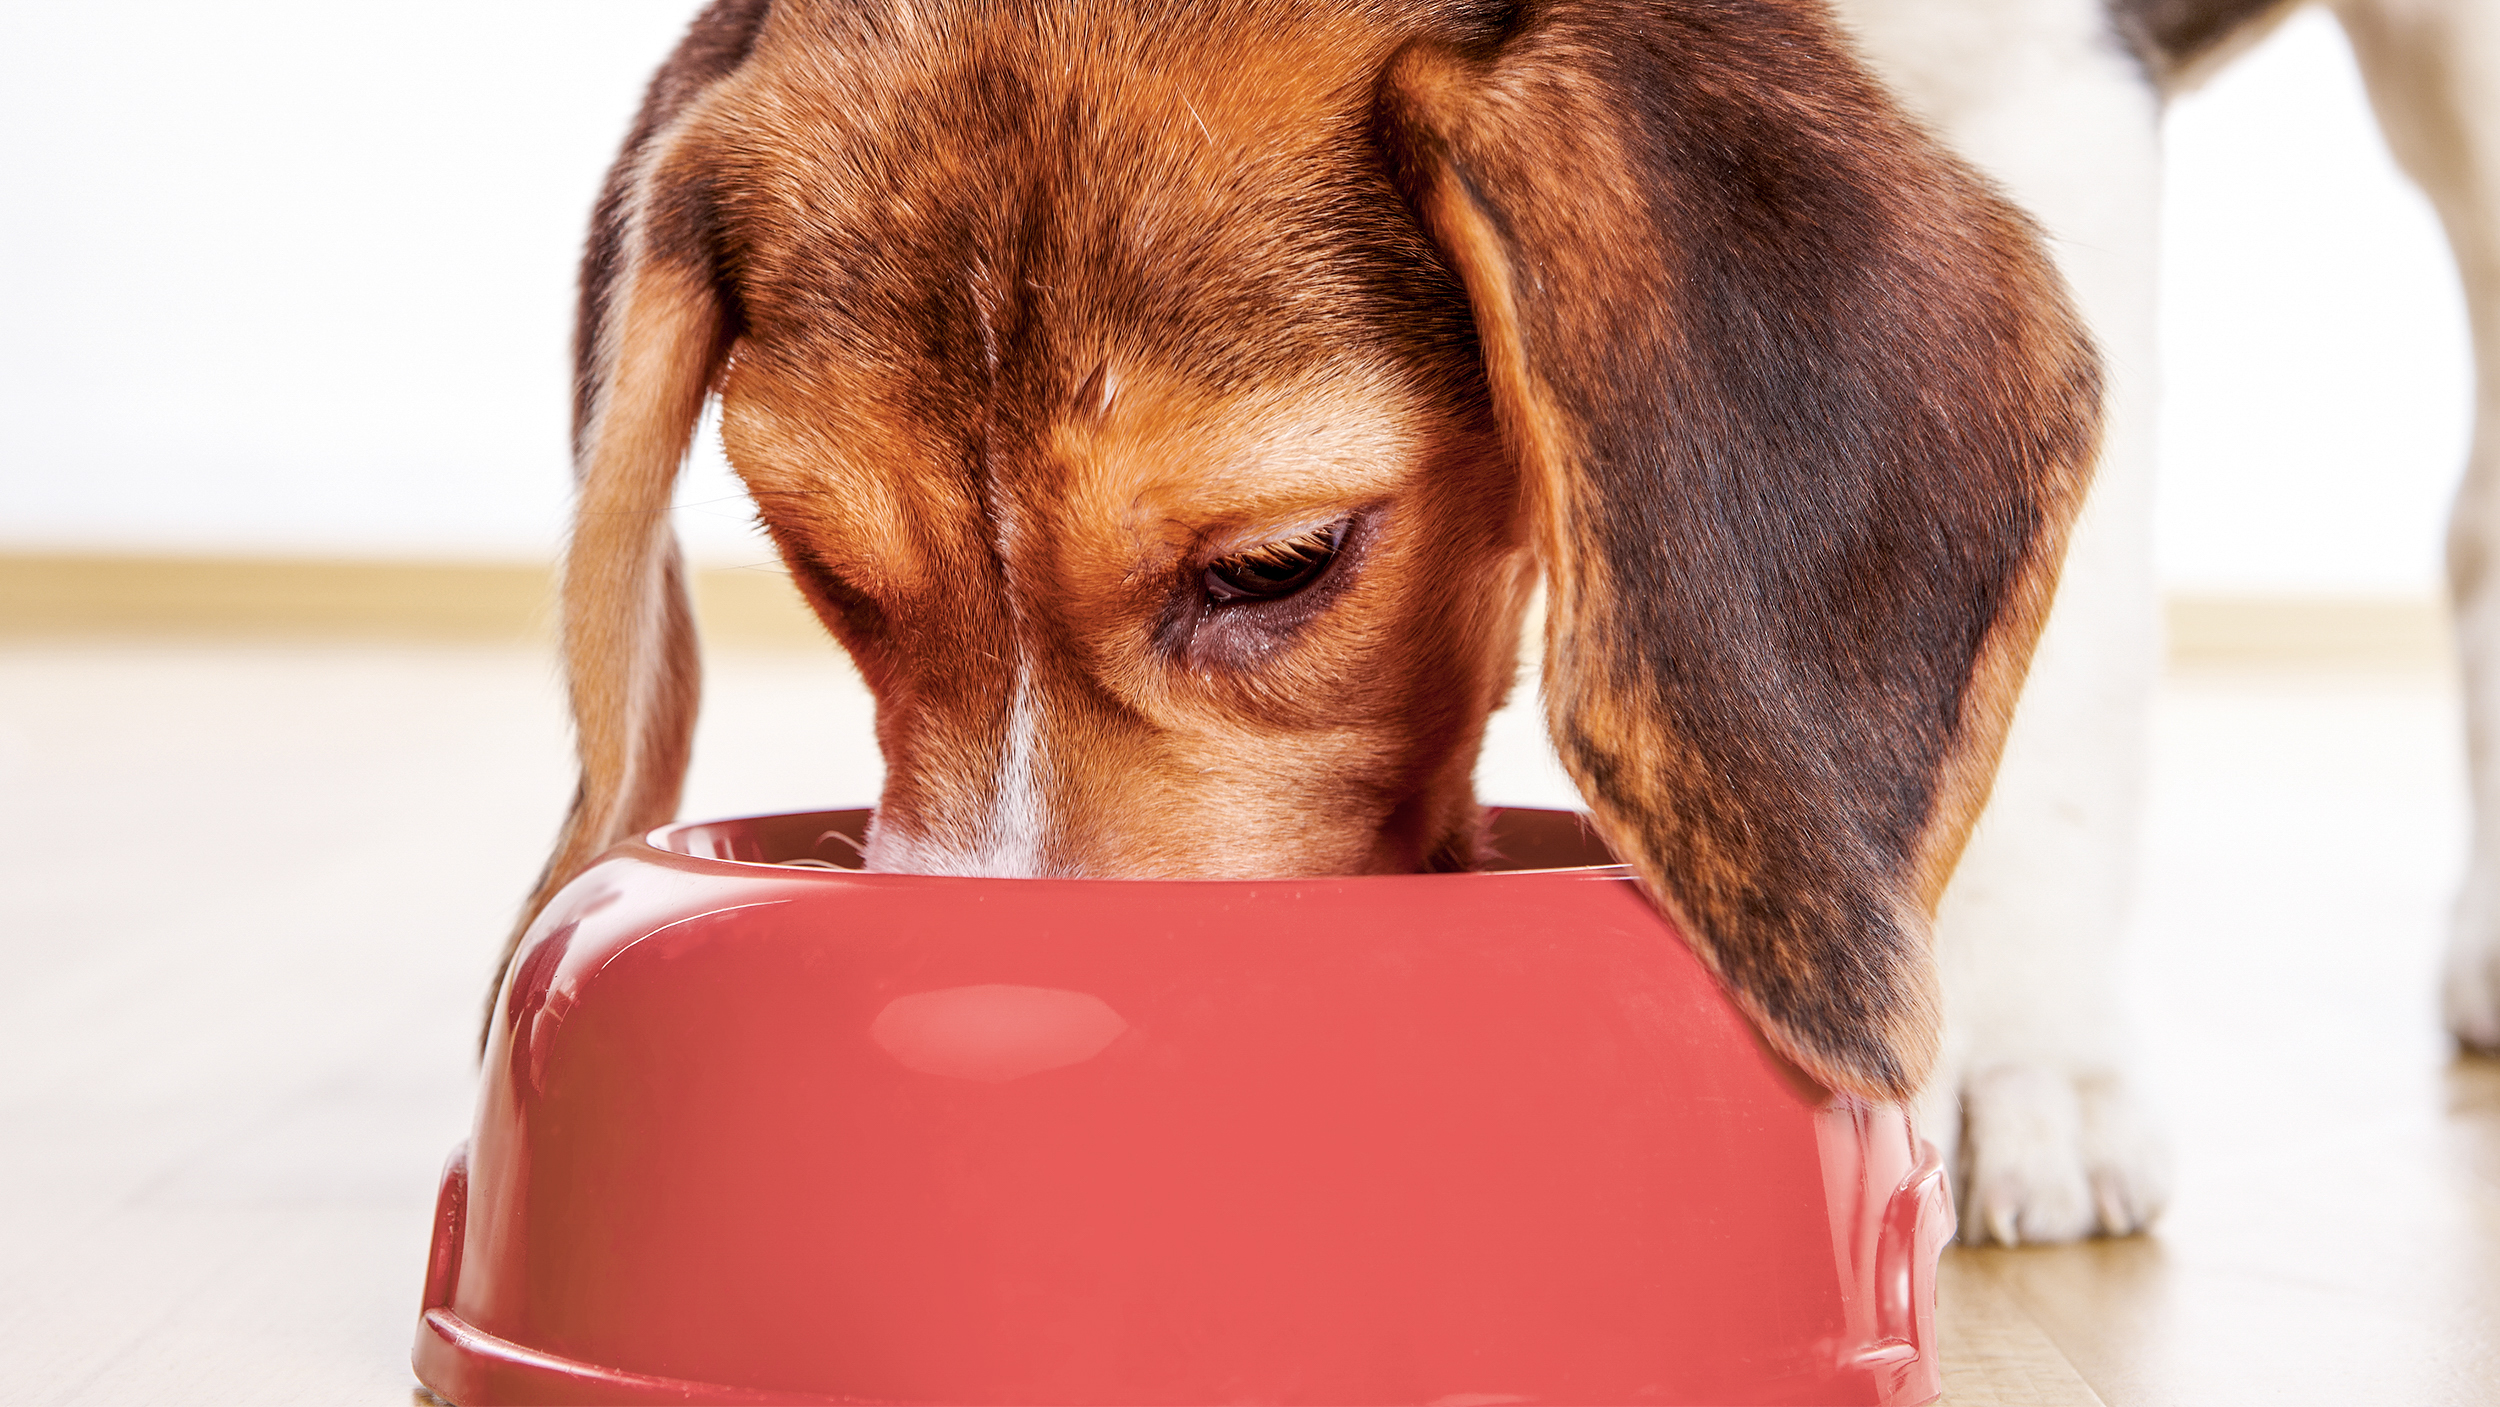 Puppy Beagle standing indoors eating from a red bowl.